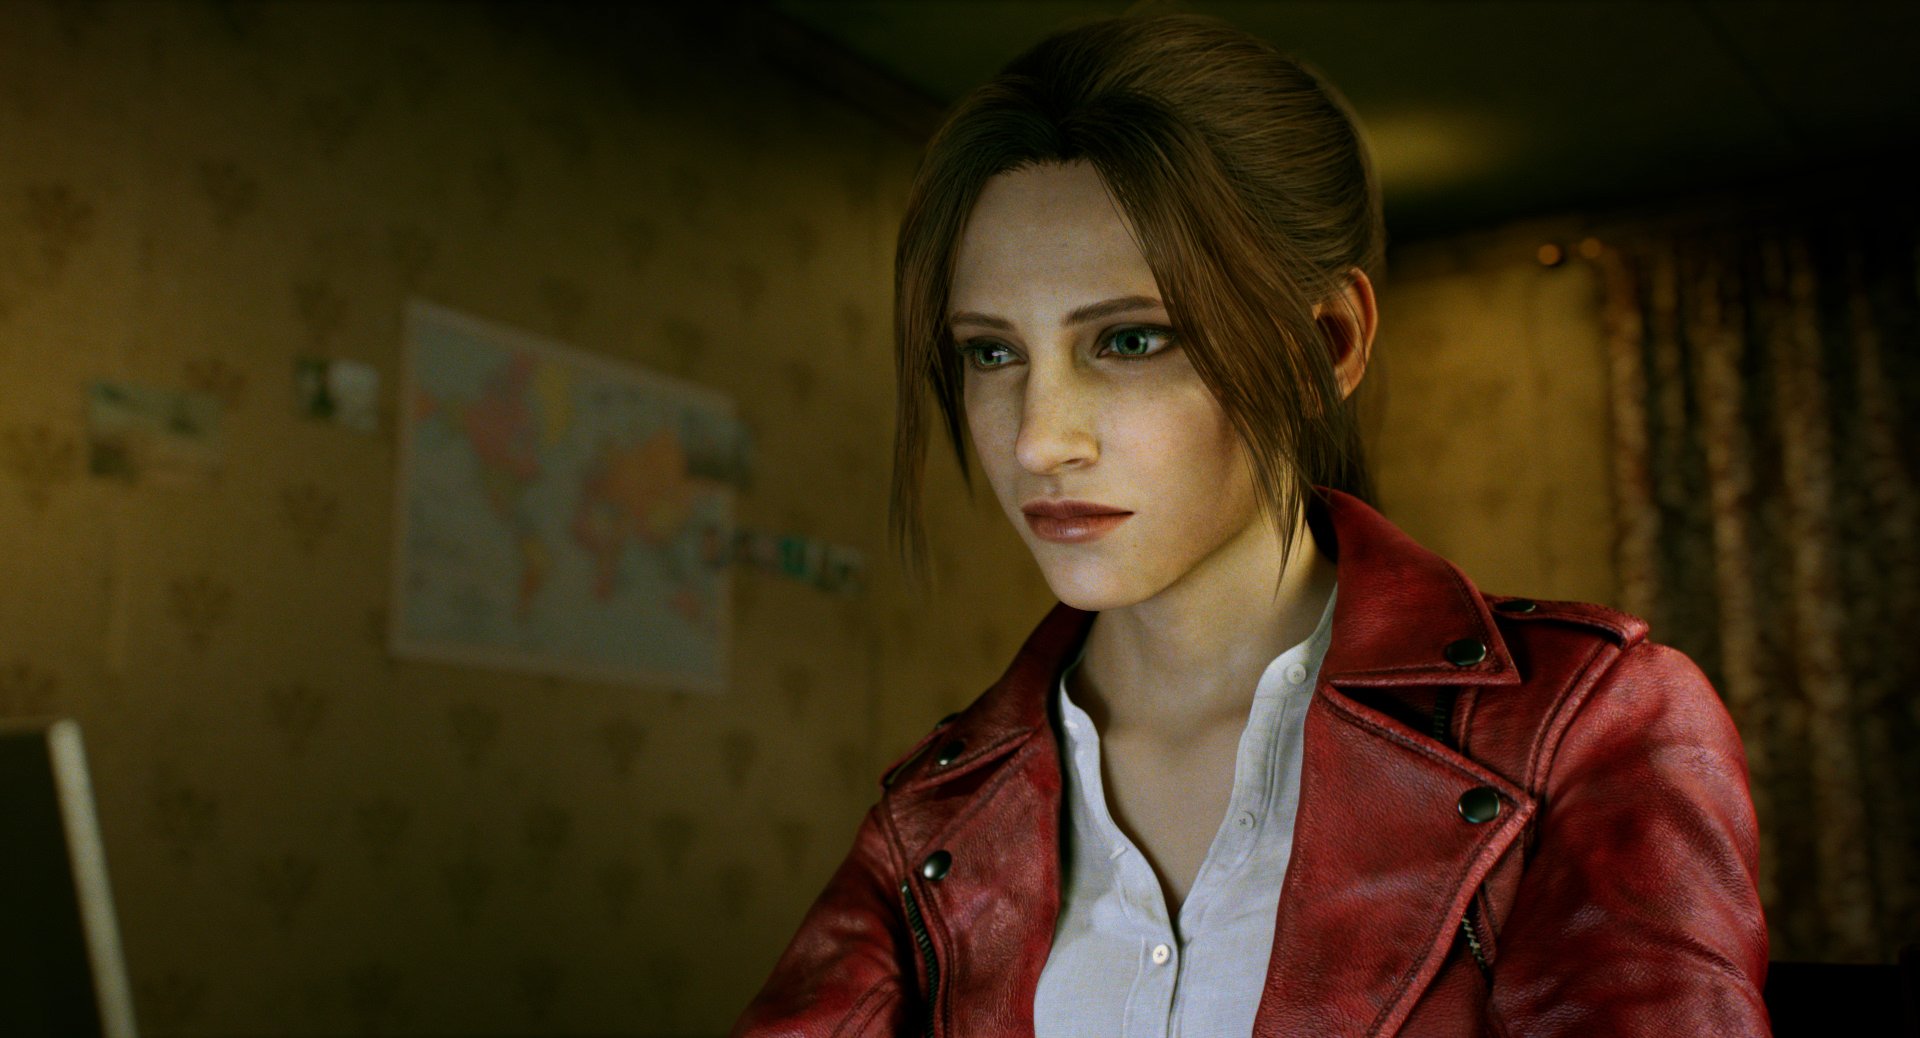 Evil claire resident Claire Redfield